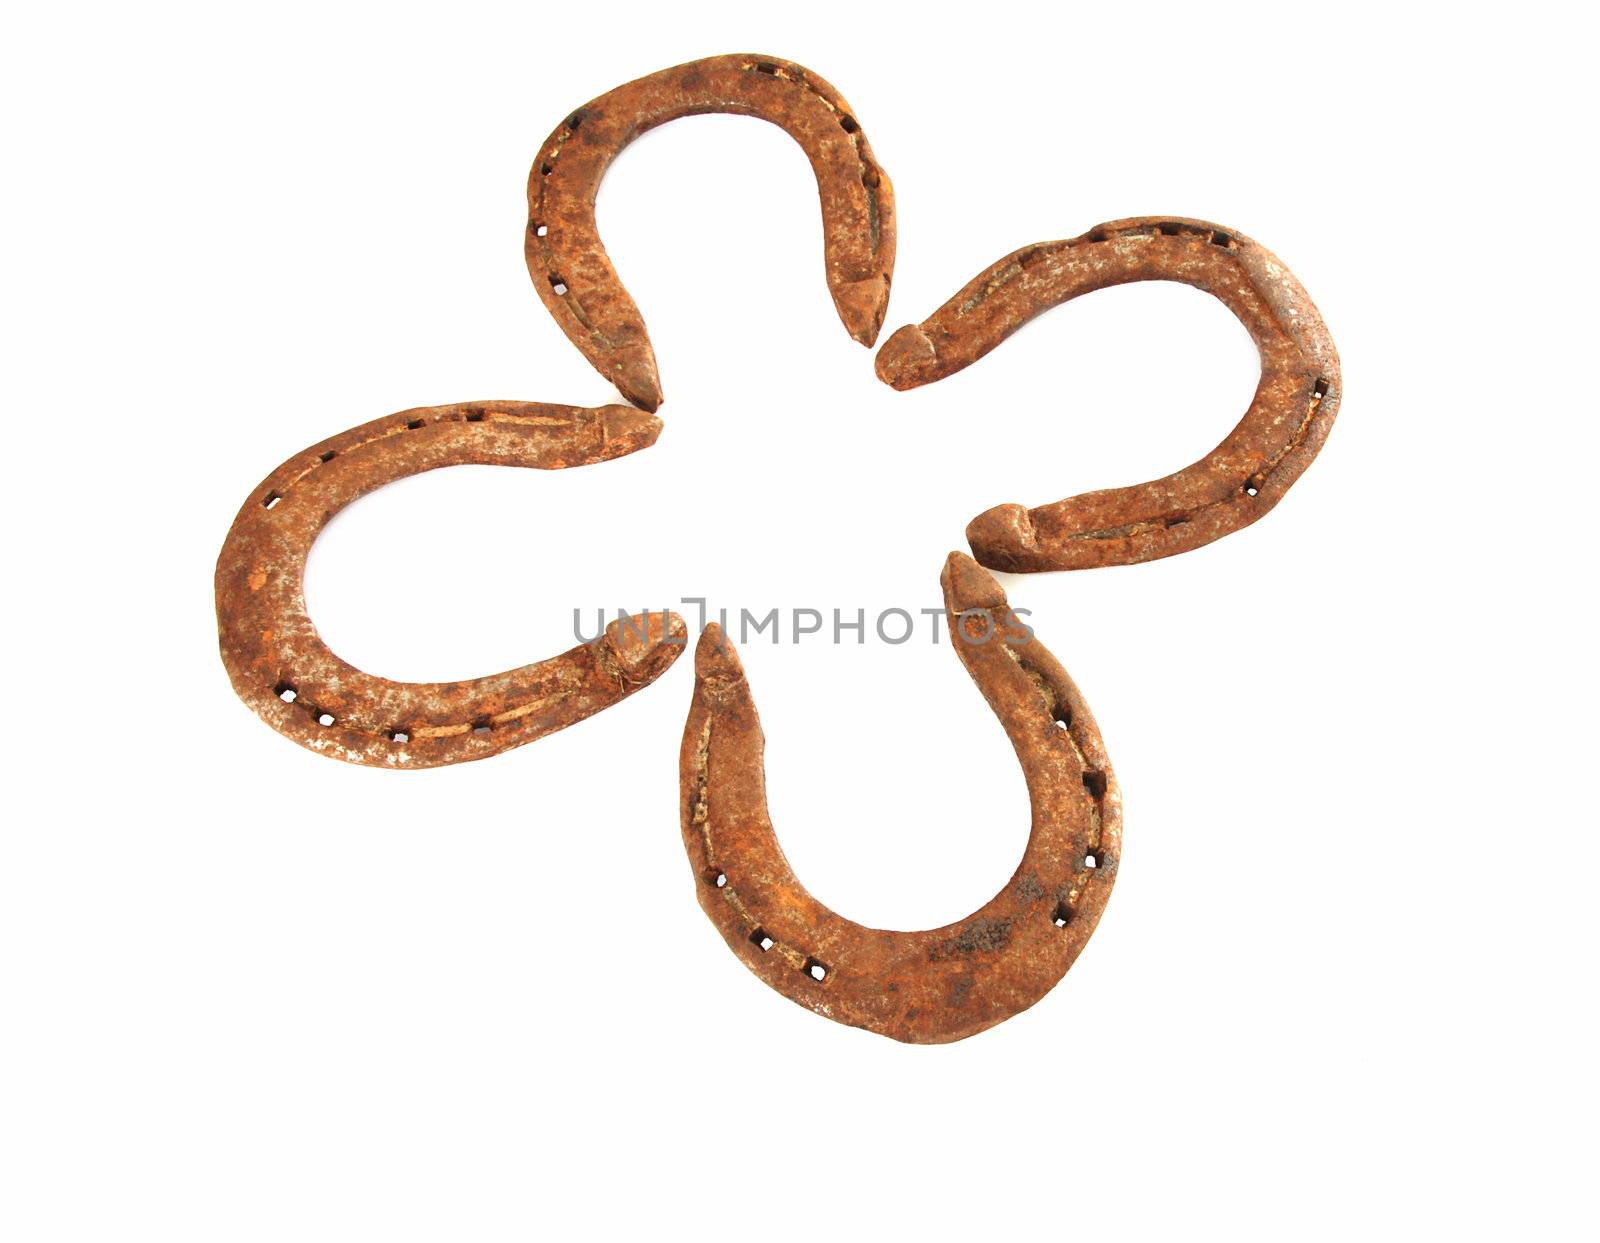 Four horseshoes create lucky four leaves clover 